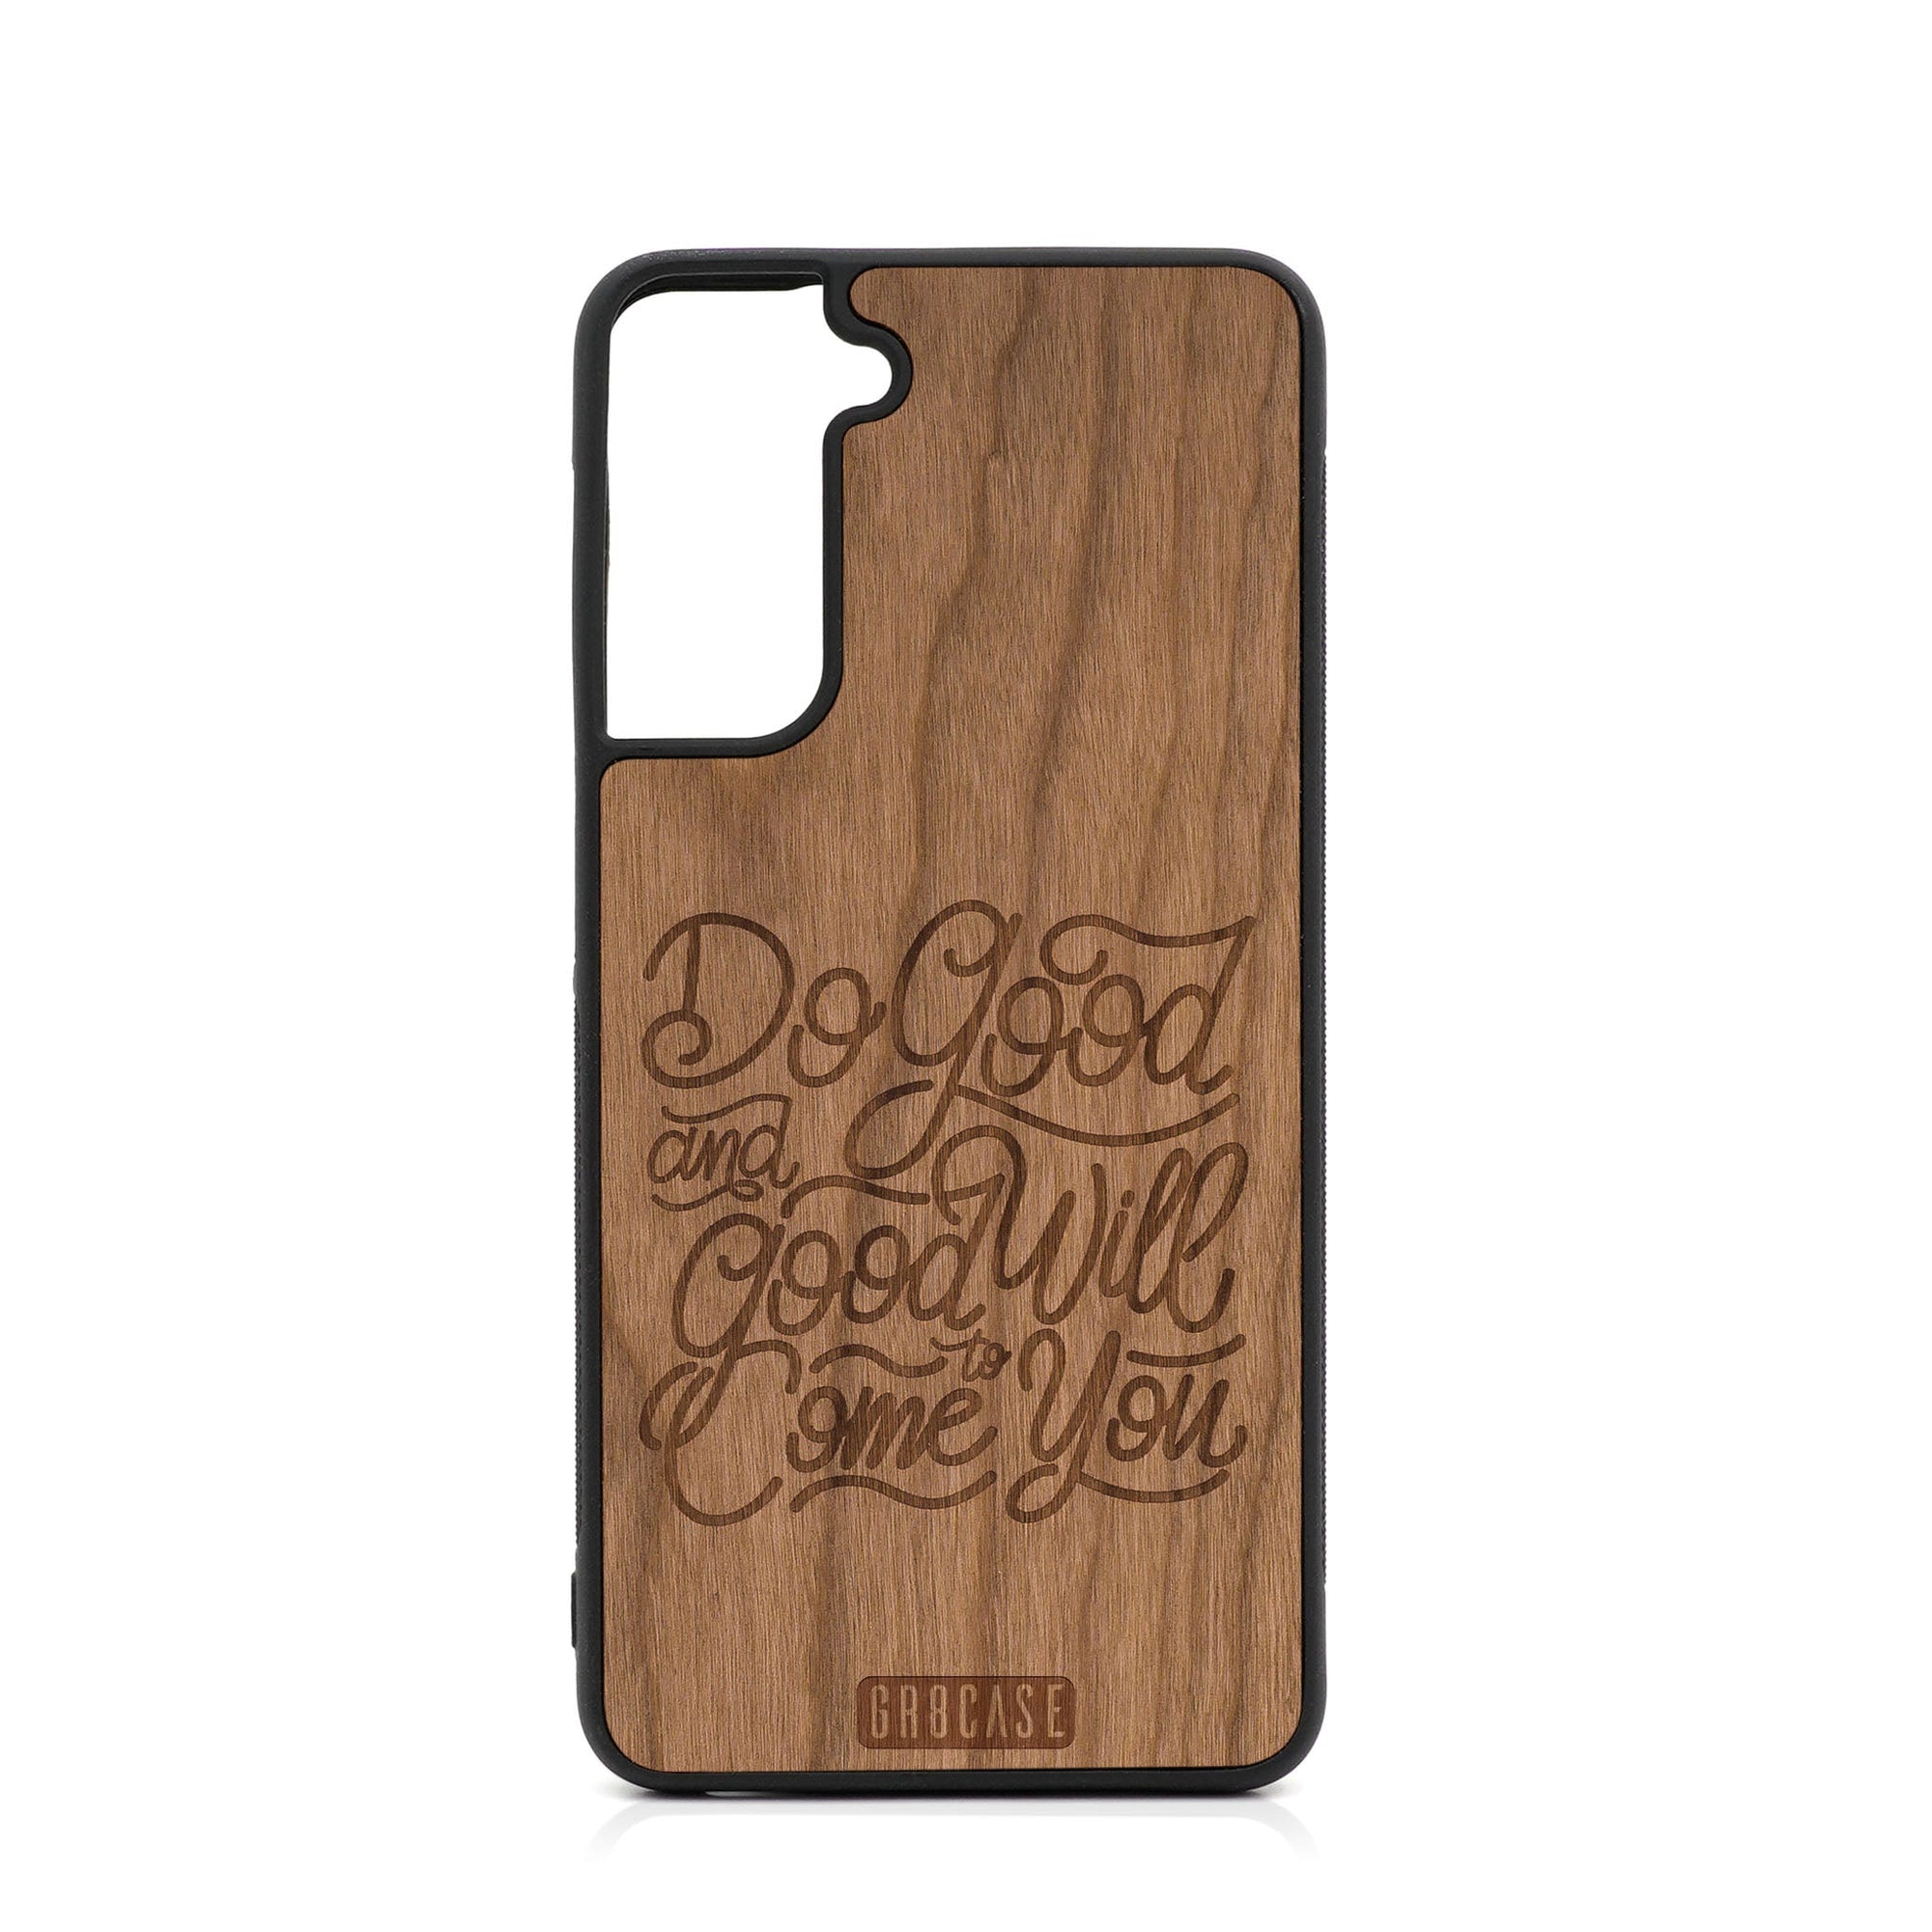 Do Good And Good Will Come To You Design Wood Case For Samsung Galaxy S22